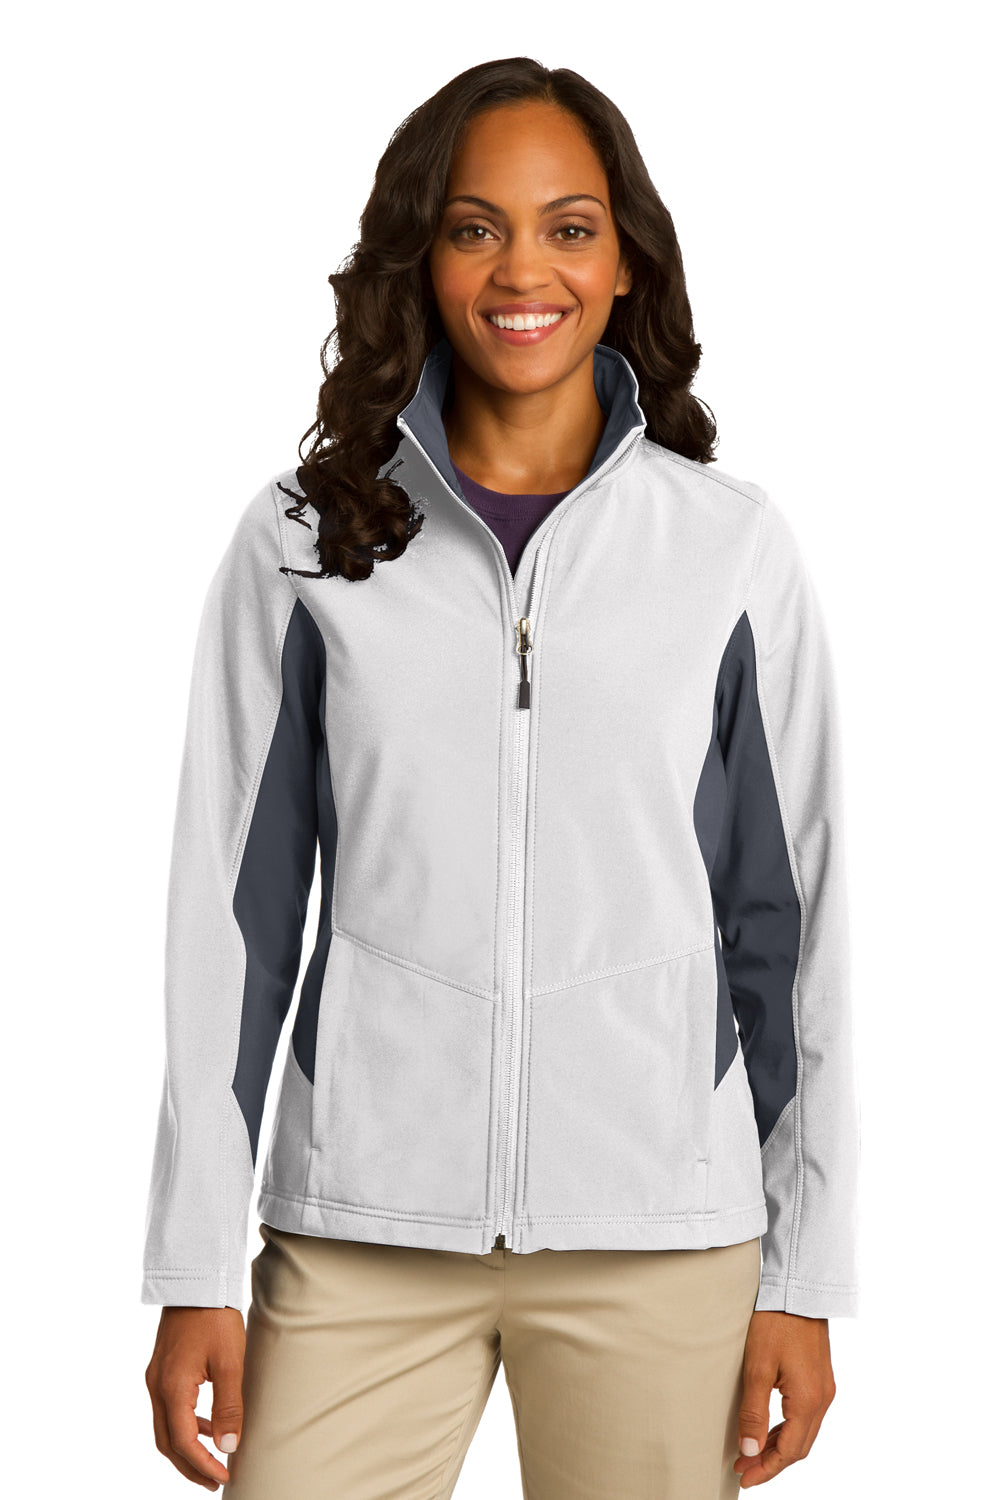 Port Authority L318 Womens Core Wind & Water Resistant Full Zip Jacket White/Grey Front